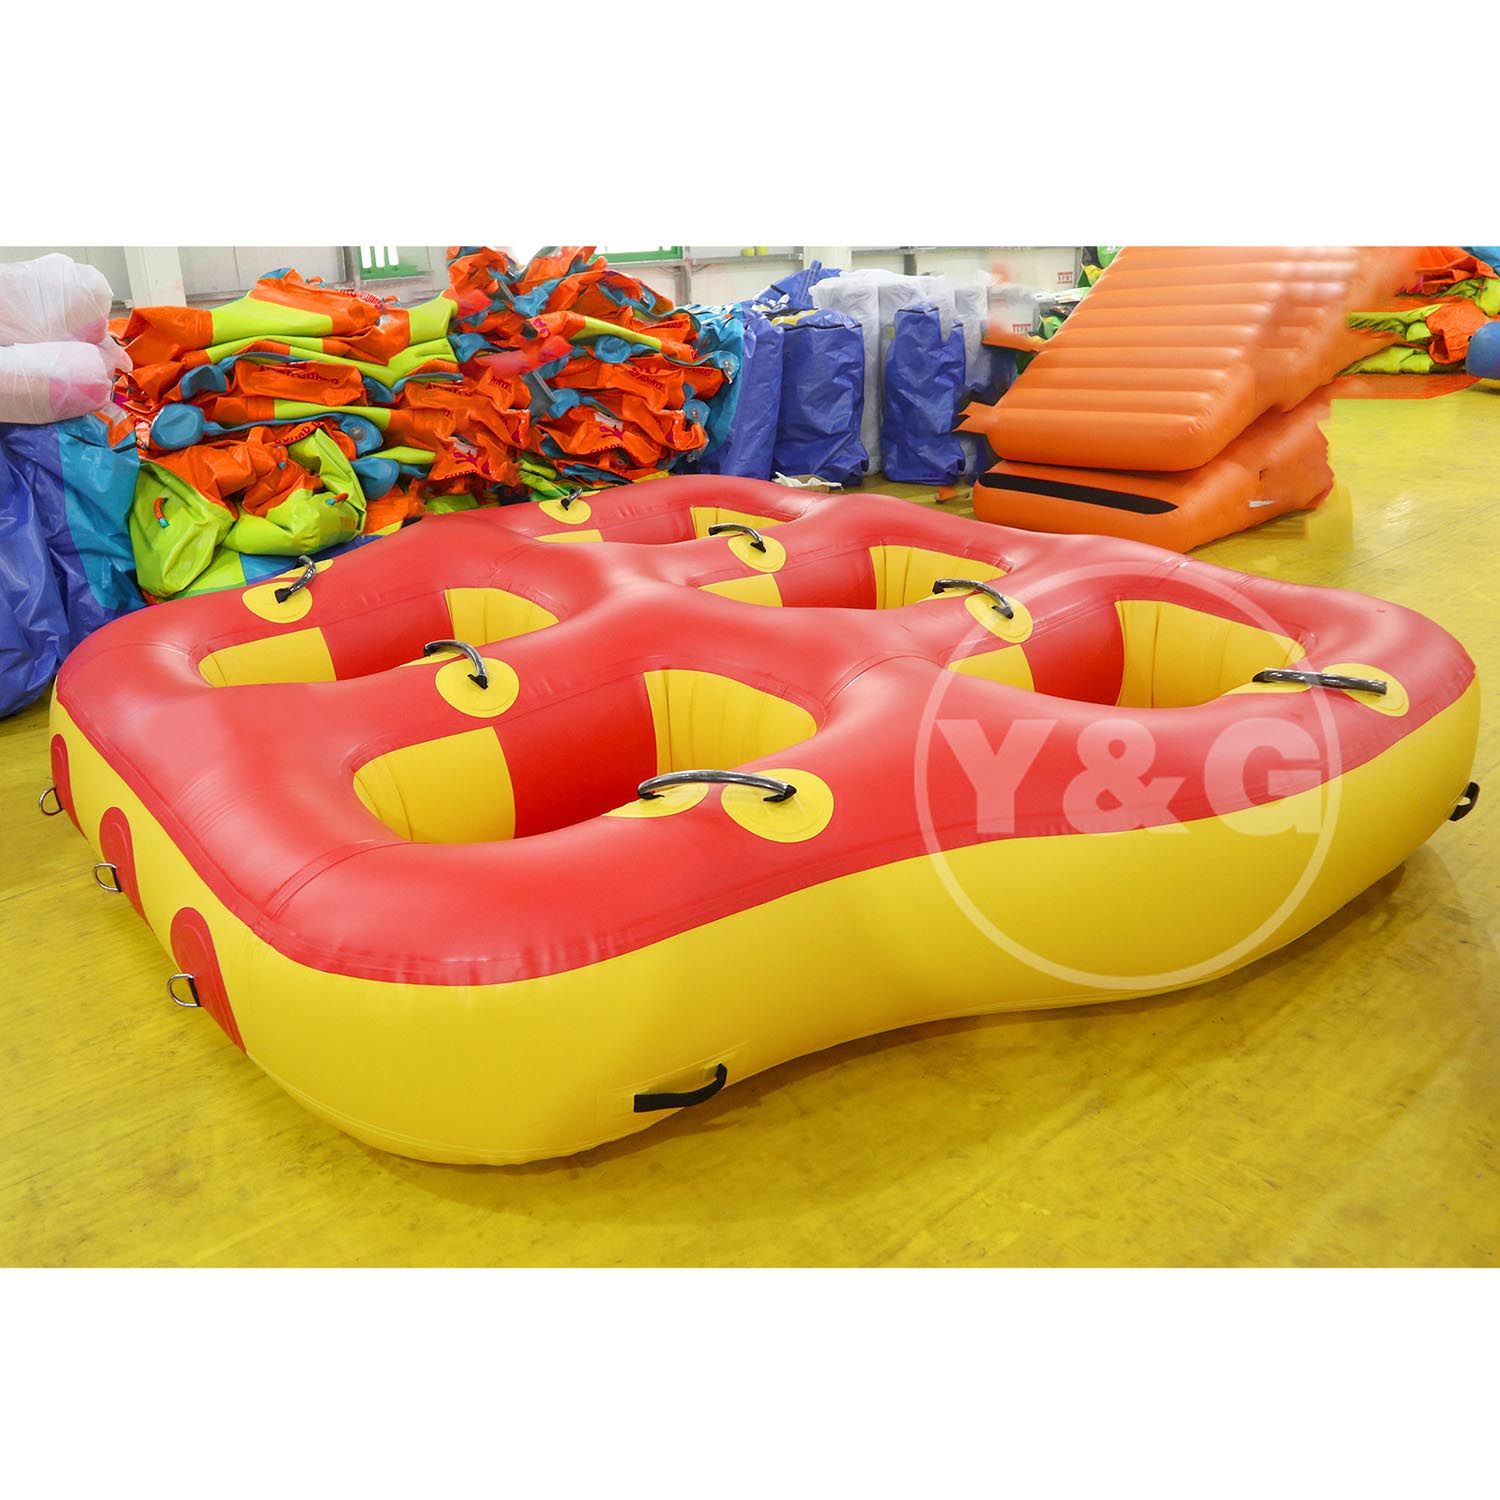 5-person Inflatable Donut Boat16